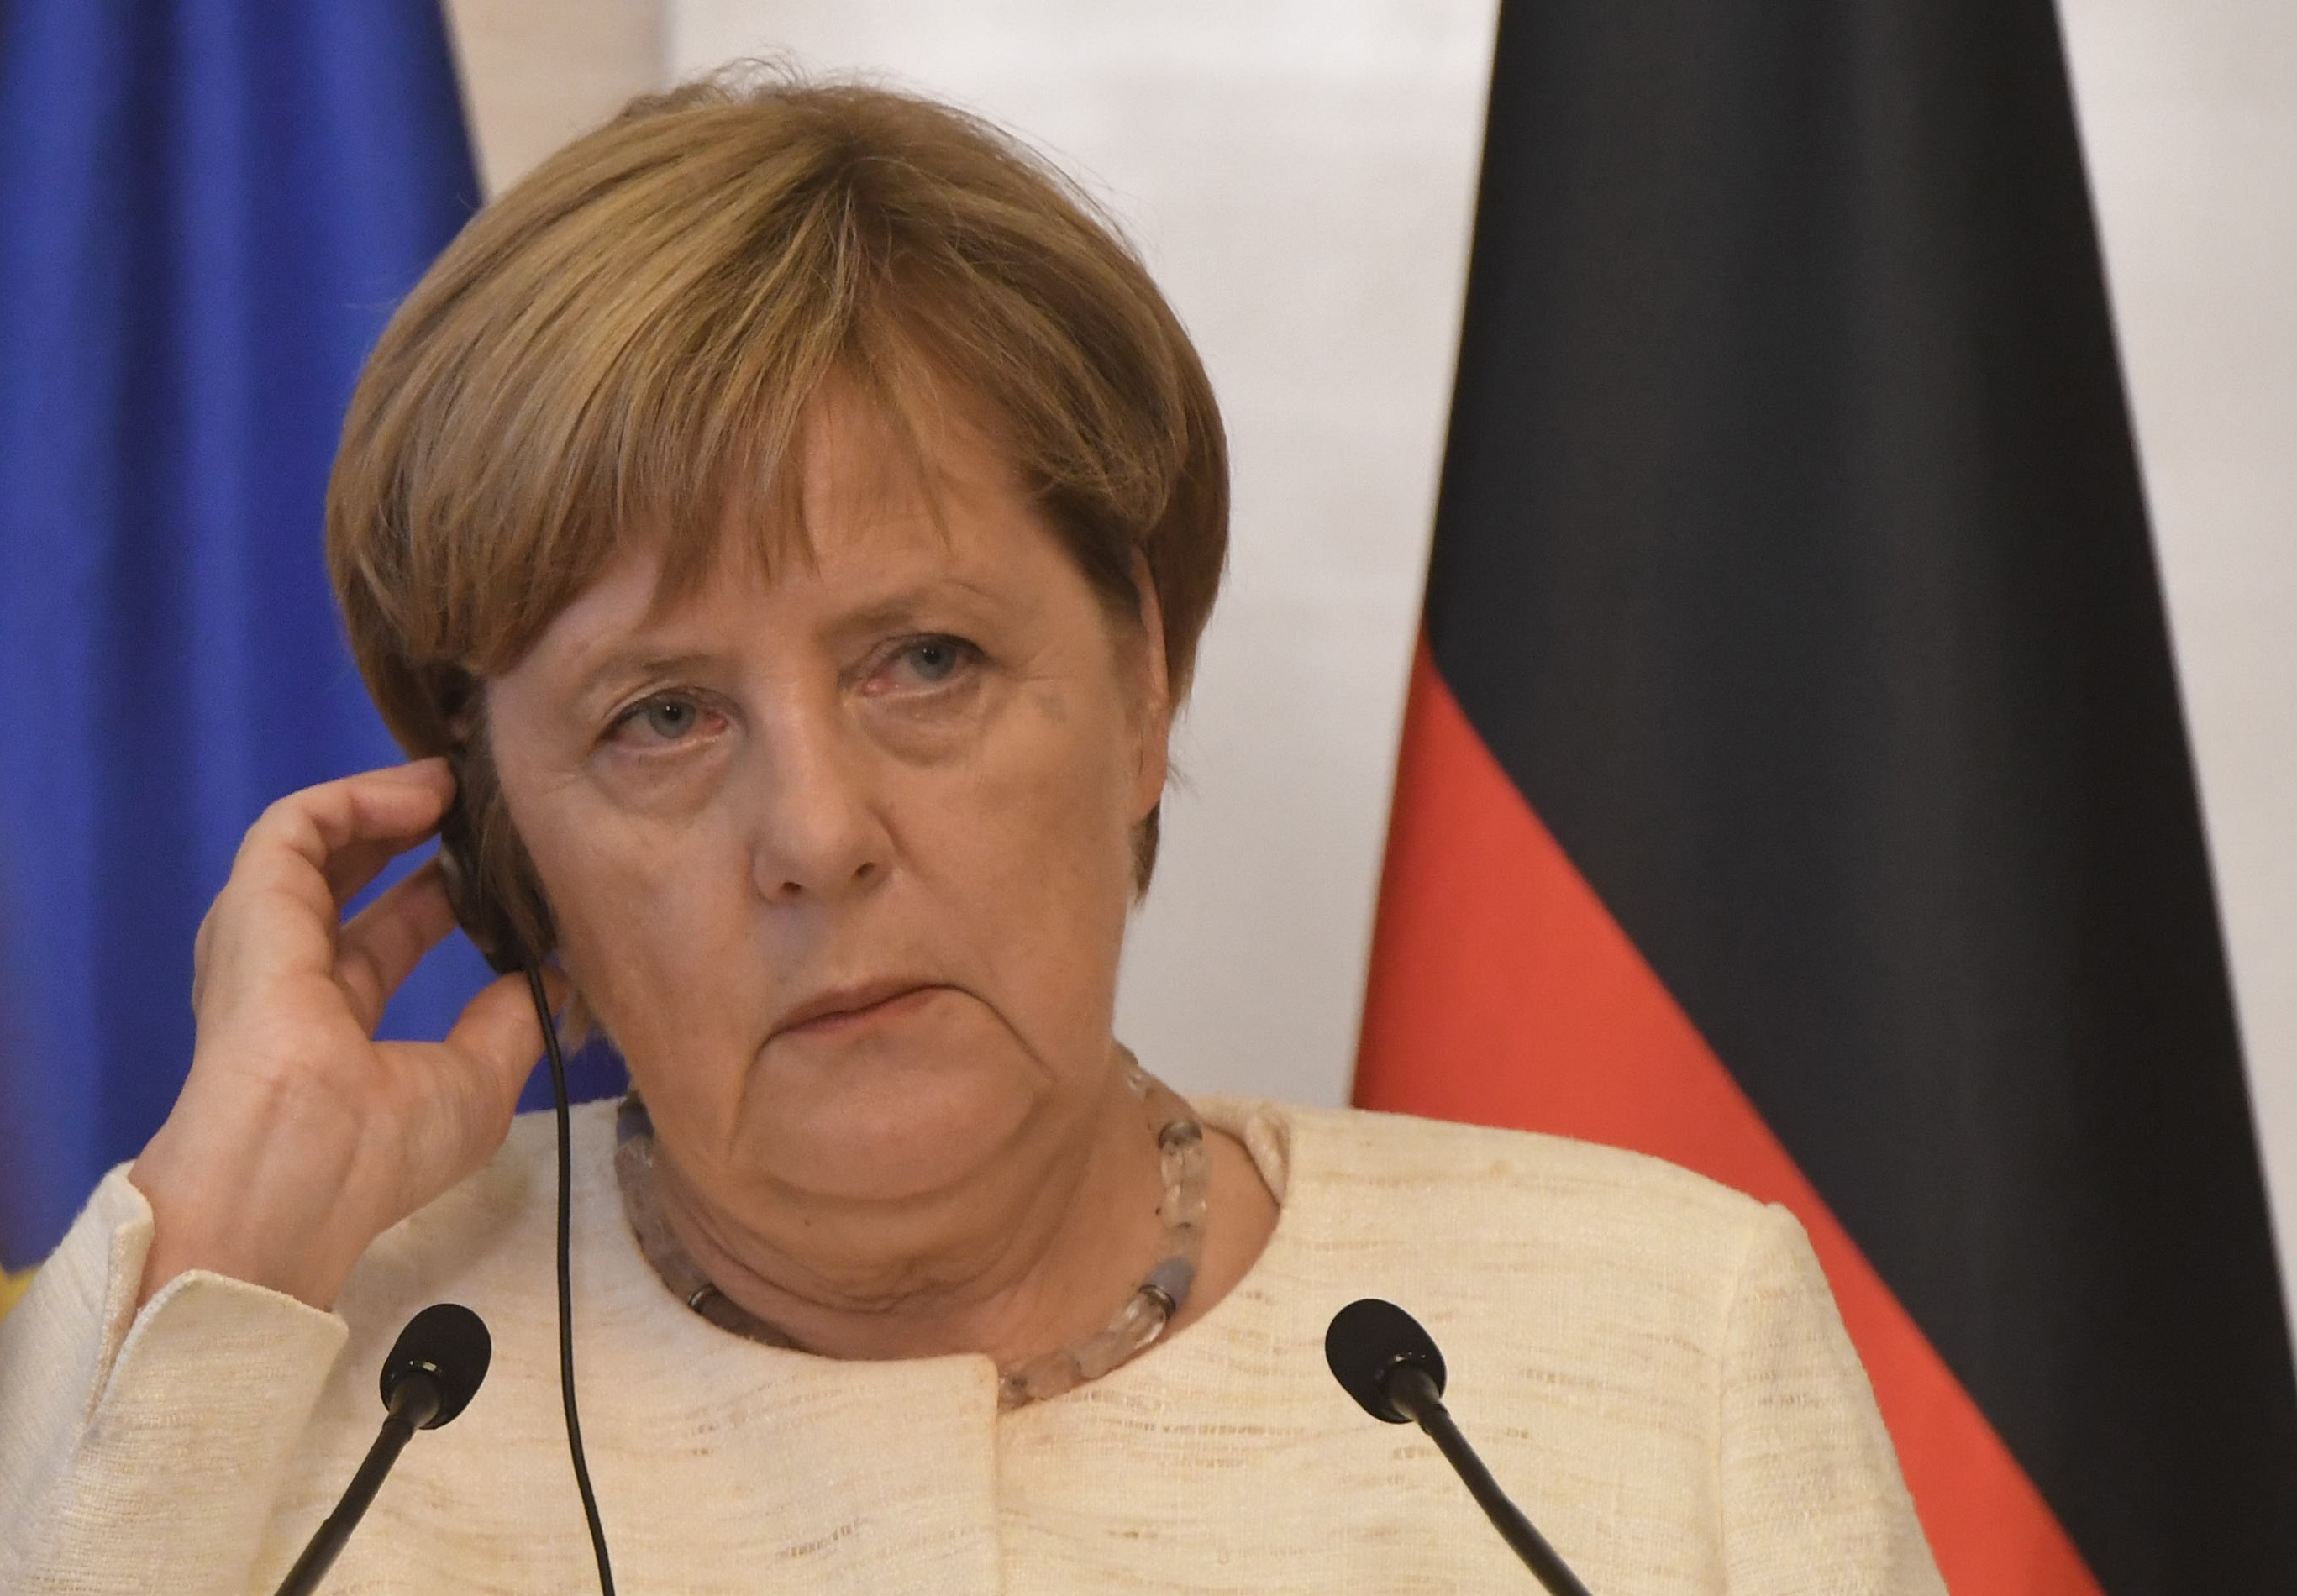 German Chancellor Angela Merkel attends a joint news conference with Georgian Prime Minister Mamuka Bakhtadze in Tbilisi, Georgia August 23, 2018